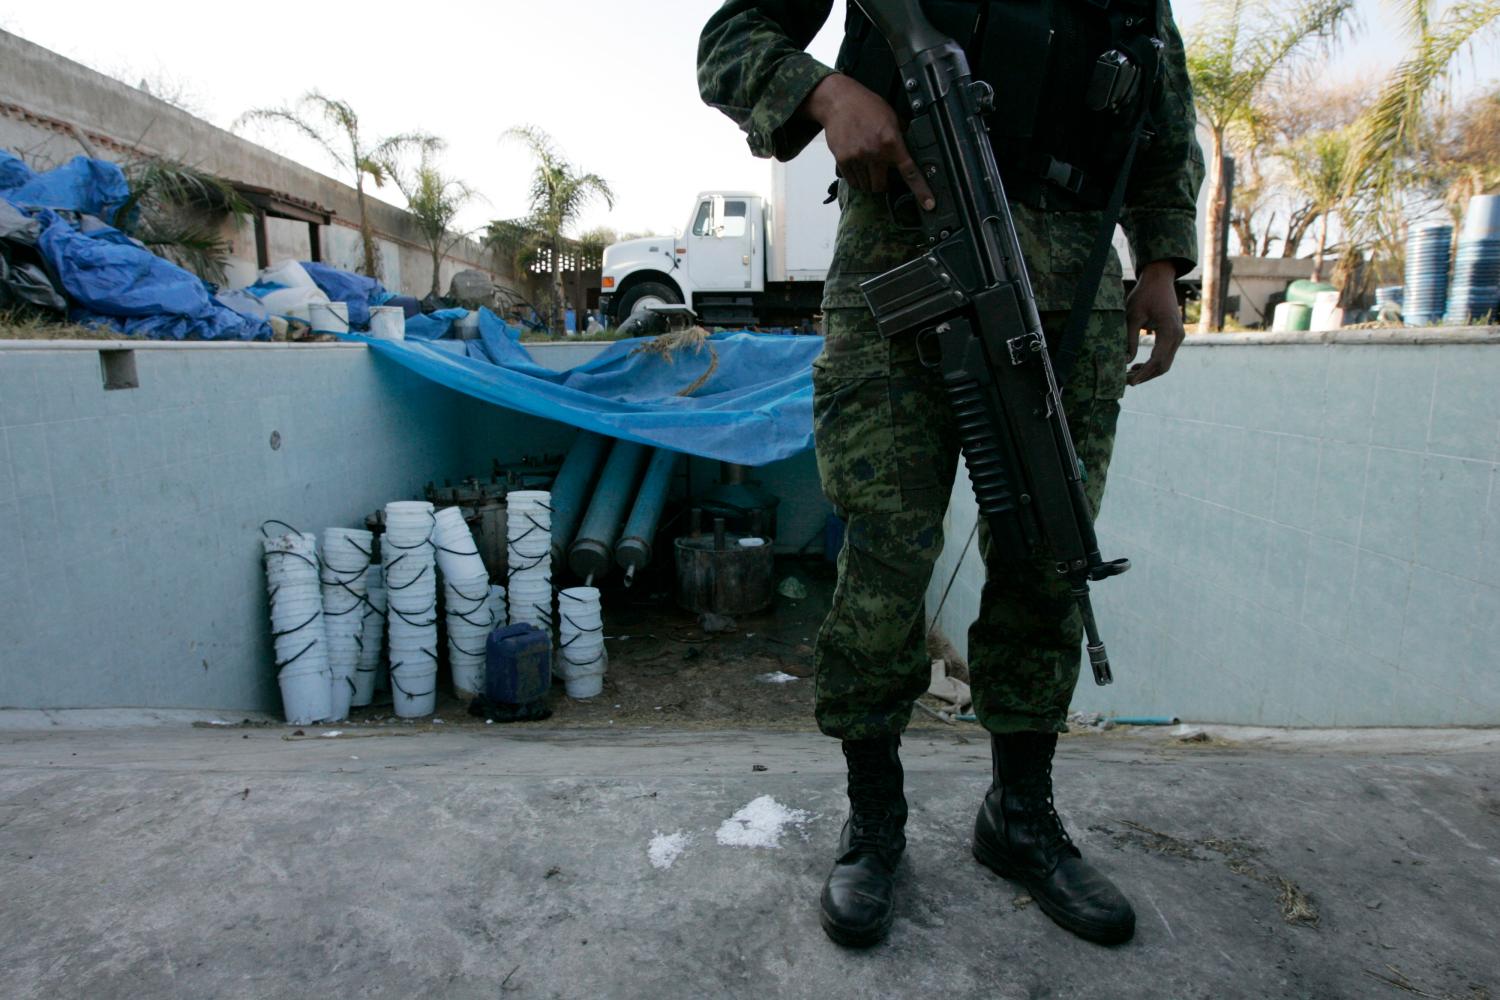 A soldier stands guard at an emptied swimming pool containing buckets at a clandestine drug processing laboratory discovered inside a ranch in Tlajomulco de Zuniga, on the outskirts of Guadalajara February 9, 2012. Soldiers found 15 tonnes of  the synthetic drug Methamphetamine, according to local media.  REUTERS/Alejandro Acosta (MEXICO - Tags: CRIME LAW CIVIL UNREST DRUGS SOCIETY)